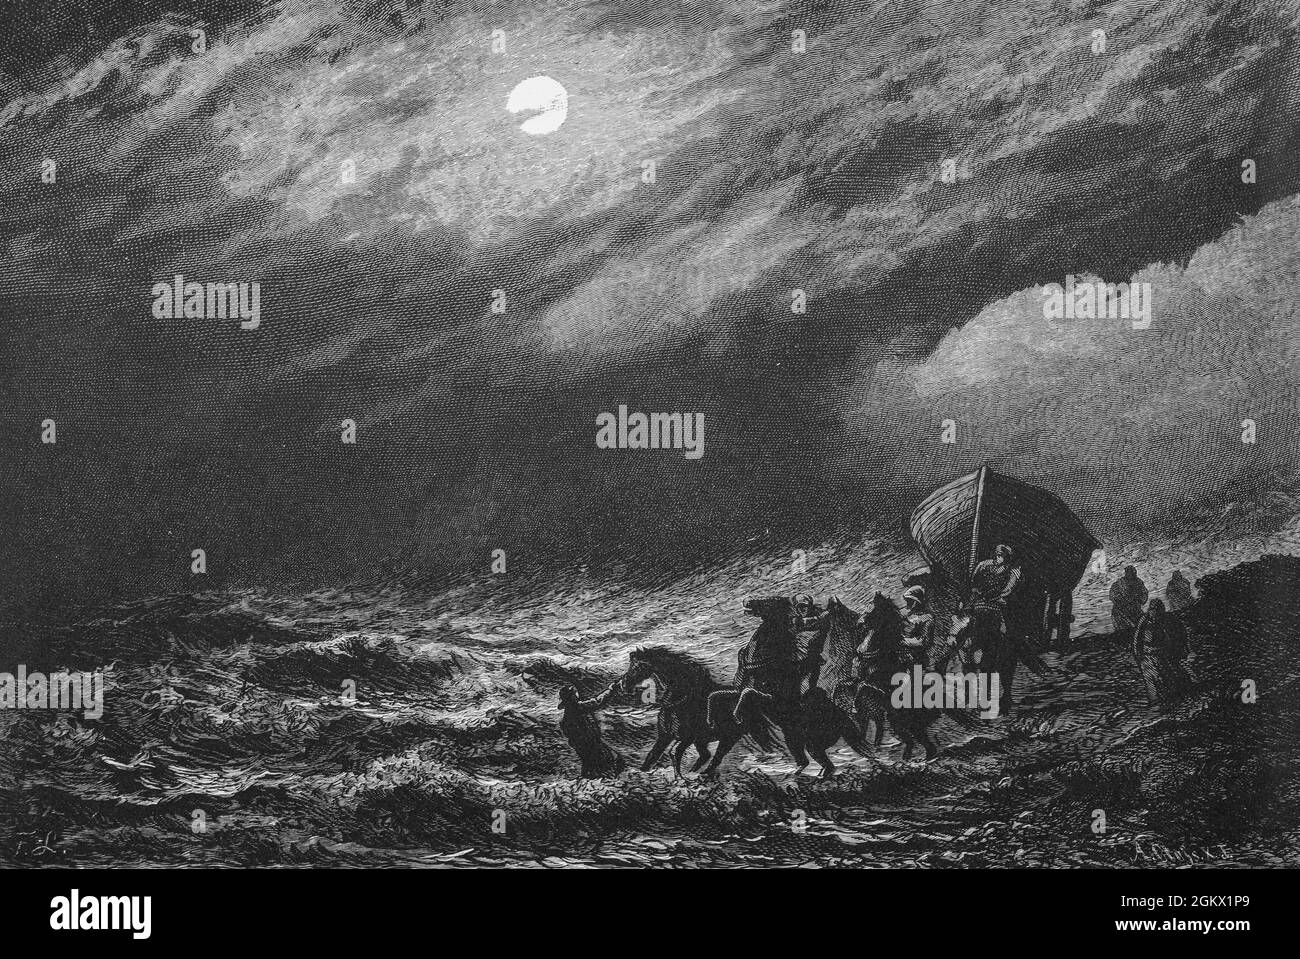 Men and horses pulling an open boat out into the stormy wadden sea at full moon, probably a rescue boat, North Germany, historical illustration 1880, Stock Photo